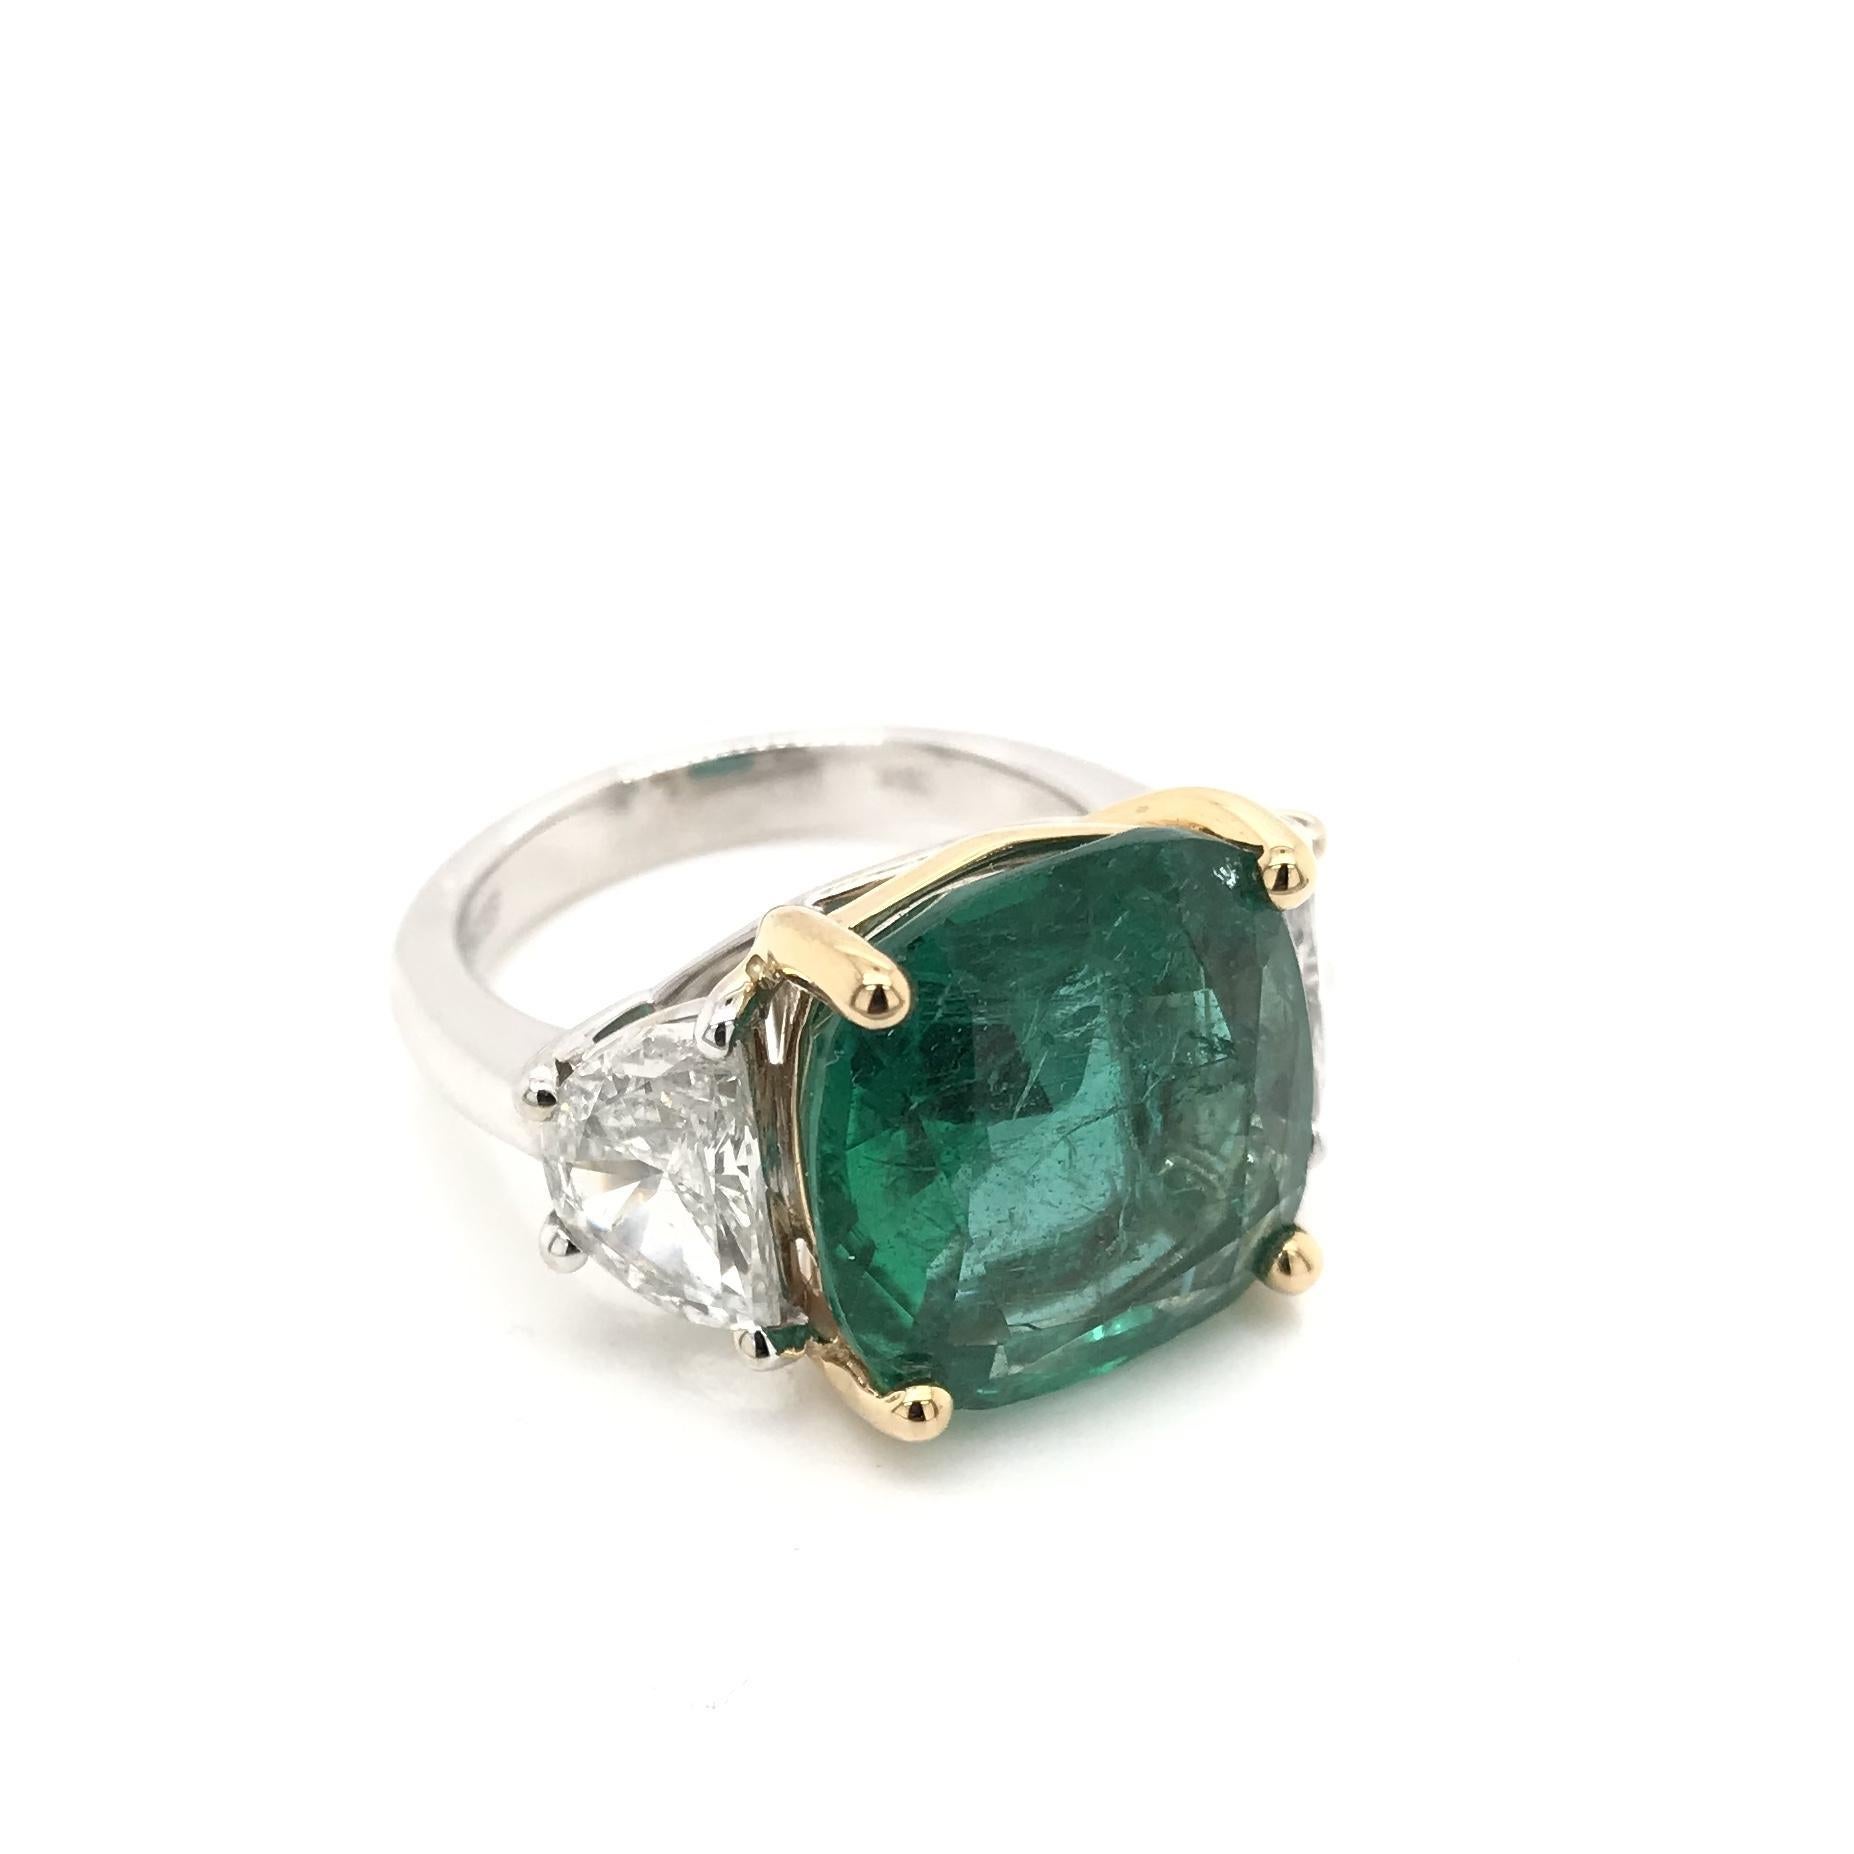 This exquisite contemporary estate piece features an emerald measuring approximately 7.88 carats. The emerald has been certified by the Gemological Institute of America (GIA). The center emerald is cushion cut and certified natural. The classic 18K